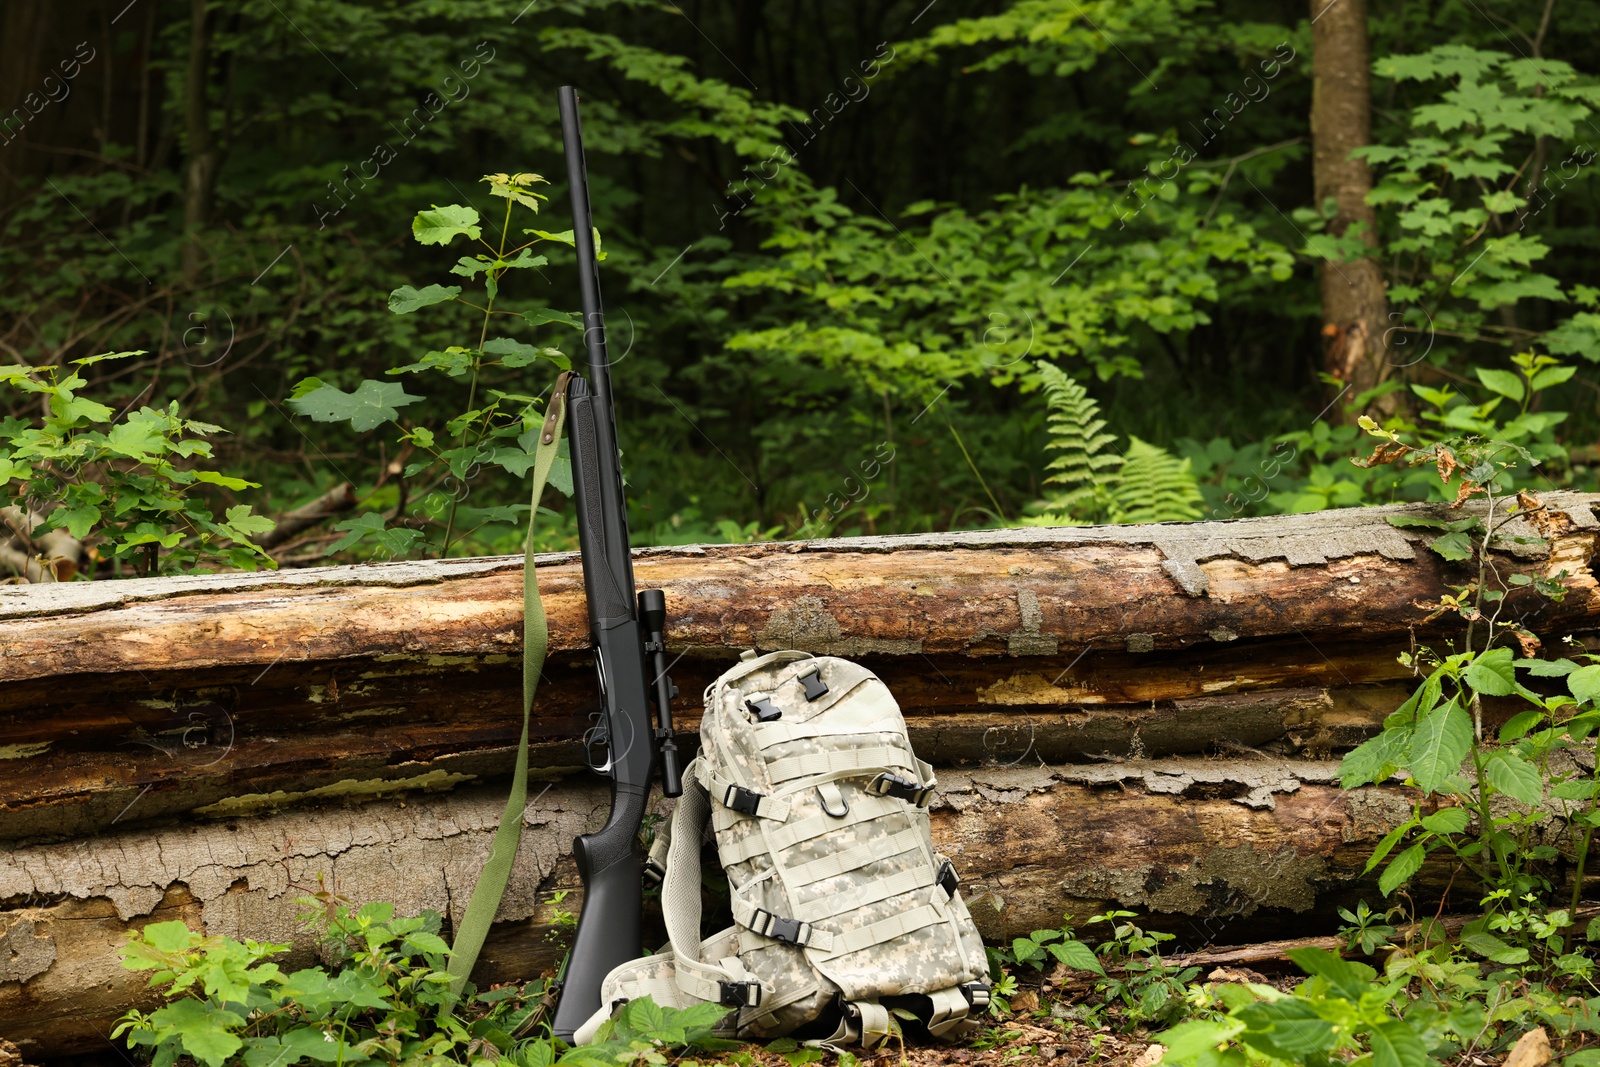 Photo of Hunting rifle and backpack near fallen tree in forest